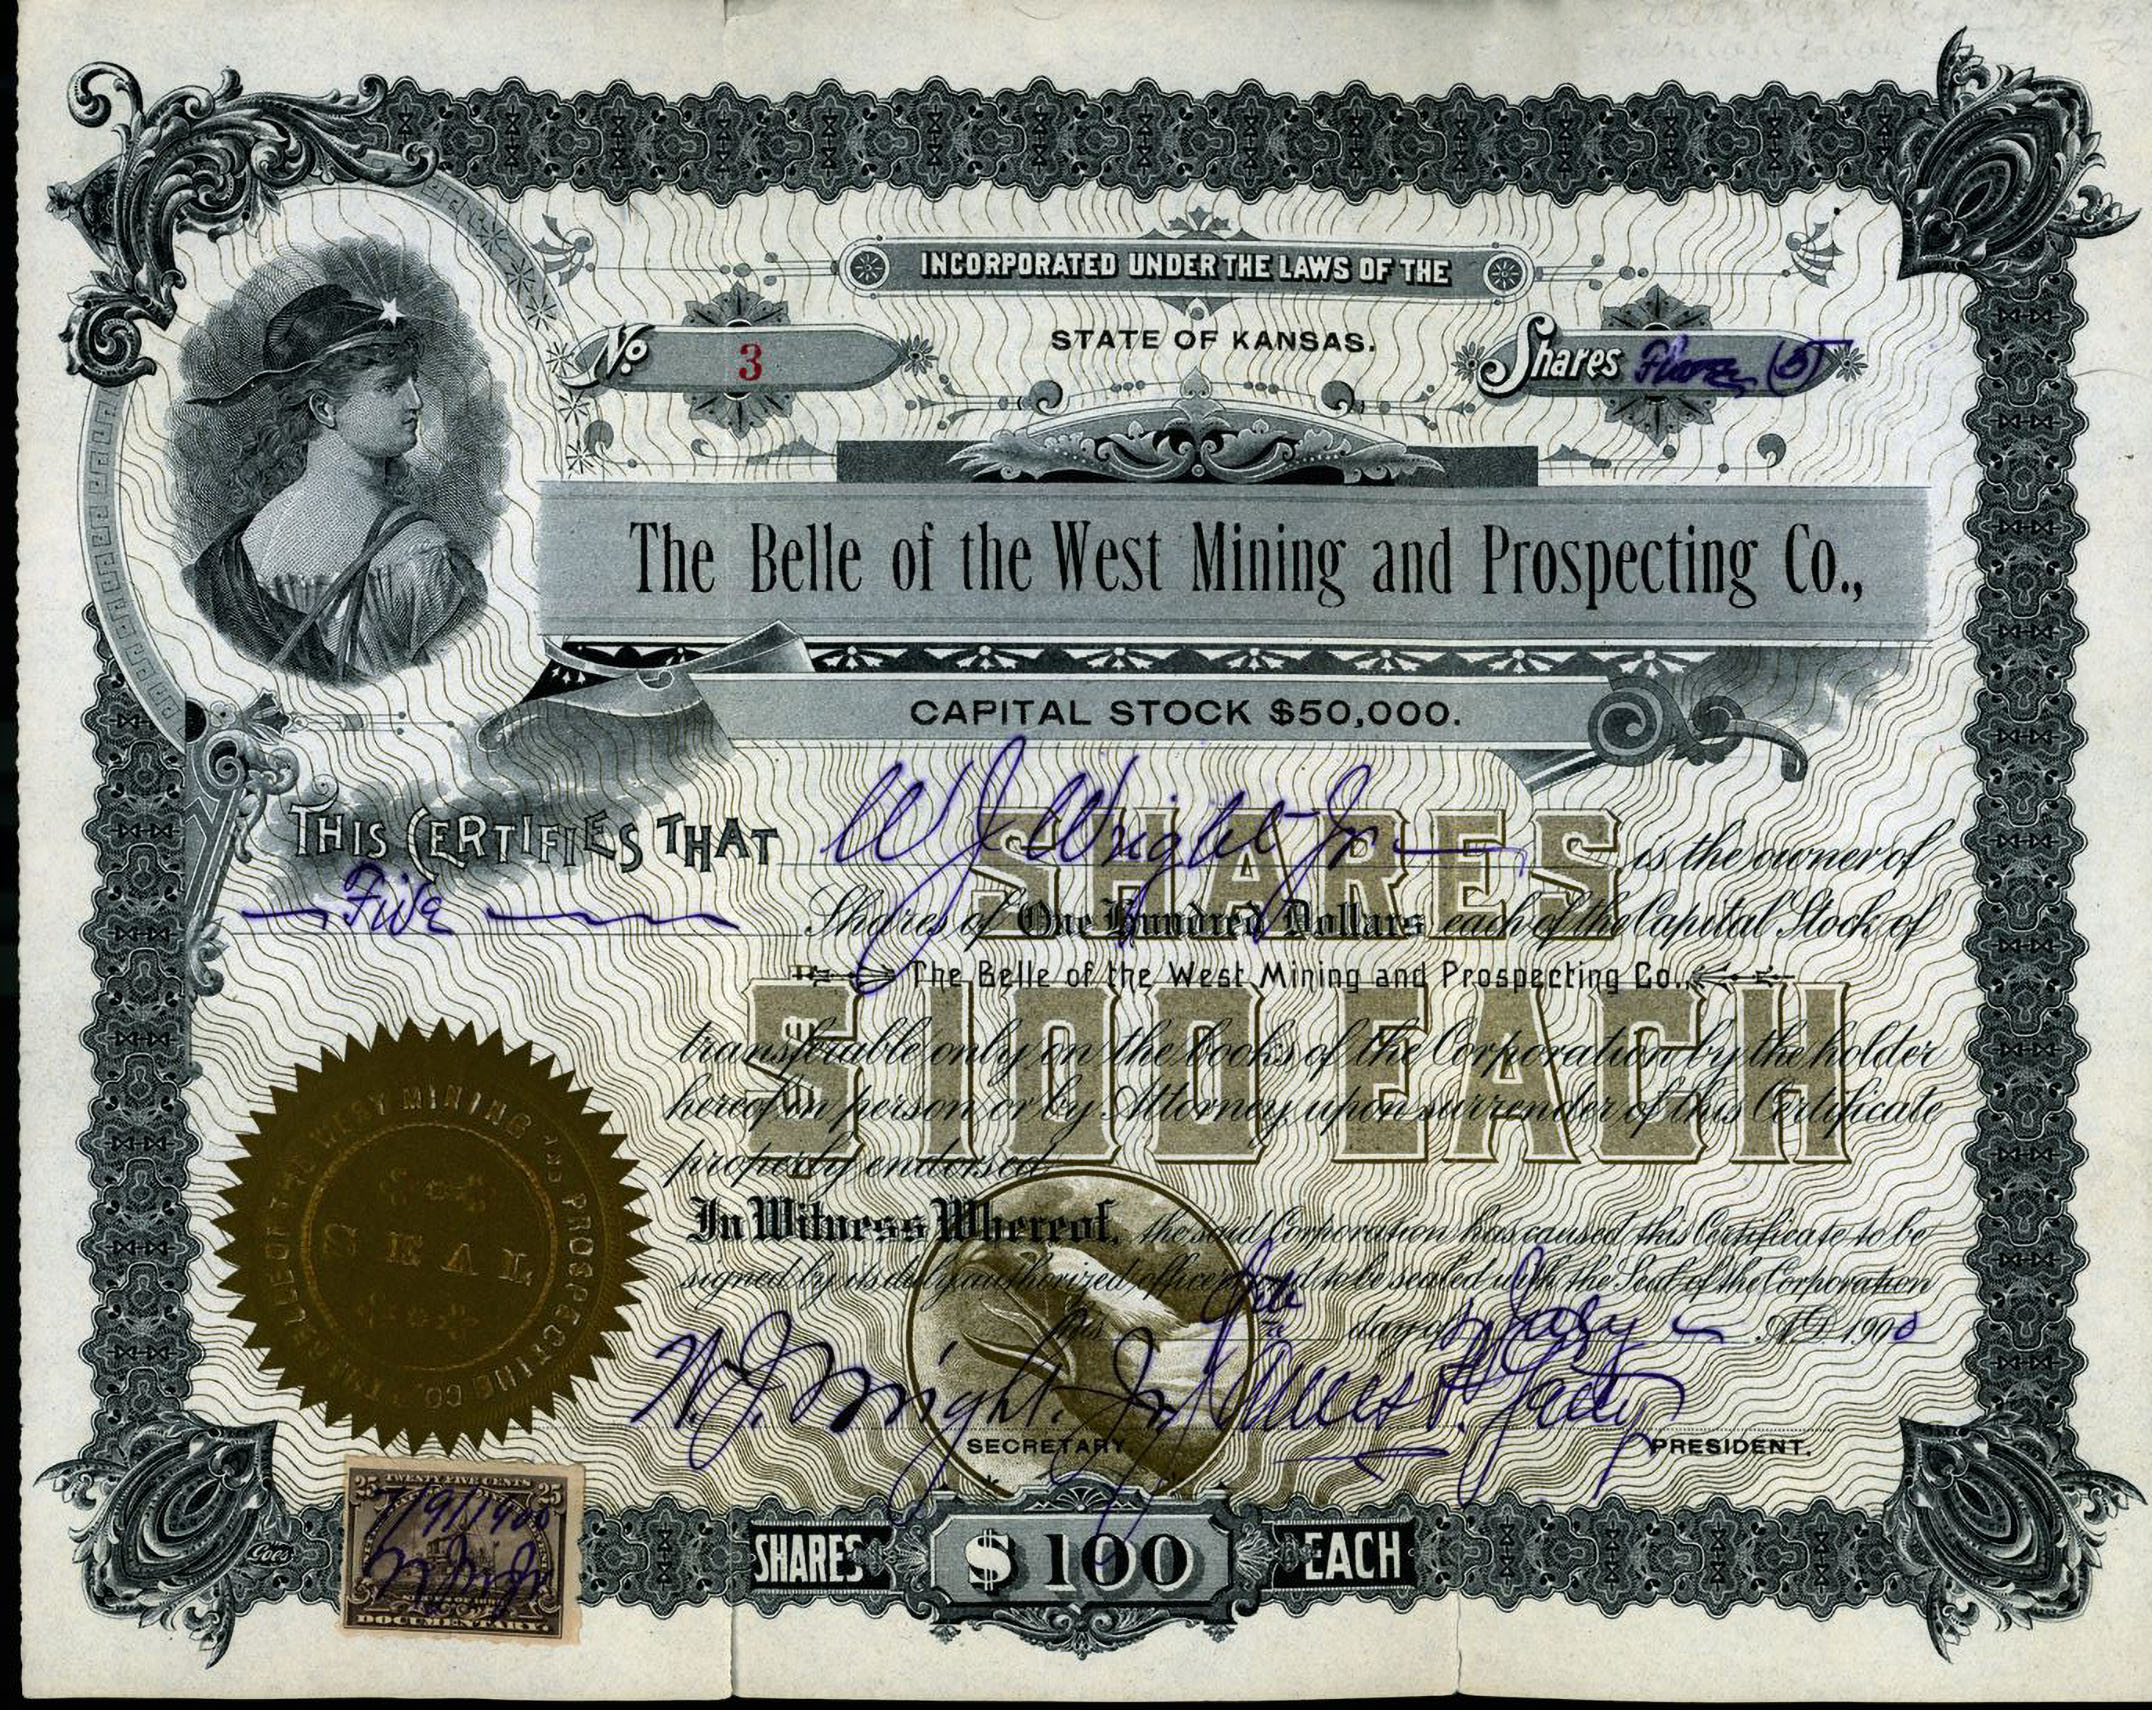 BELLE OF THE WEST MINING & PROSPECTING COMPANY Lake City Hinsdale County Colorado stock certificate 1900